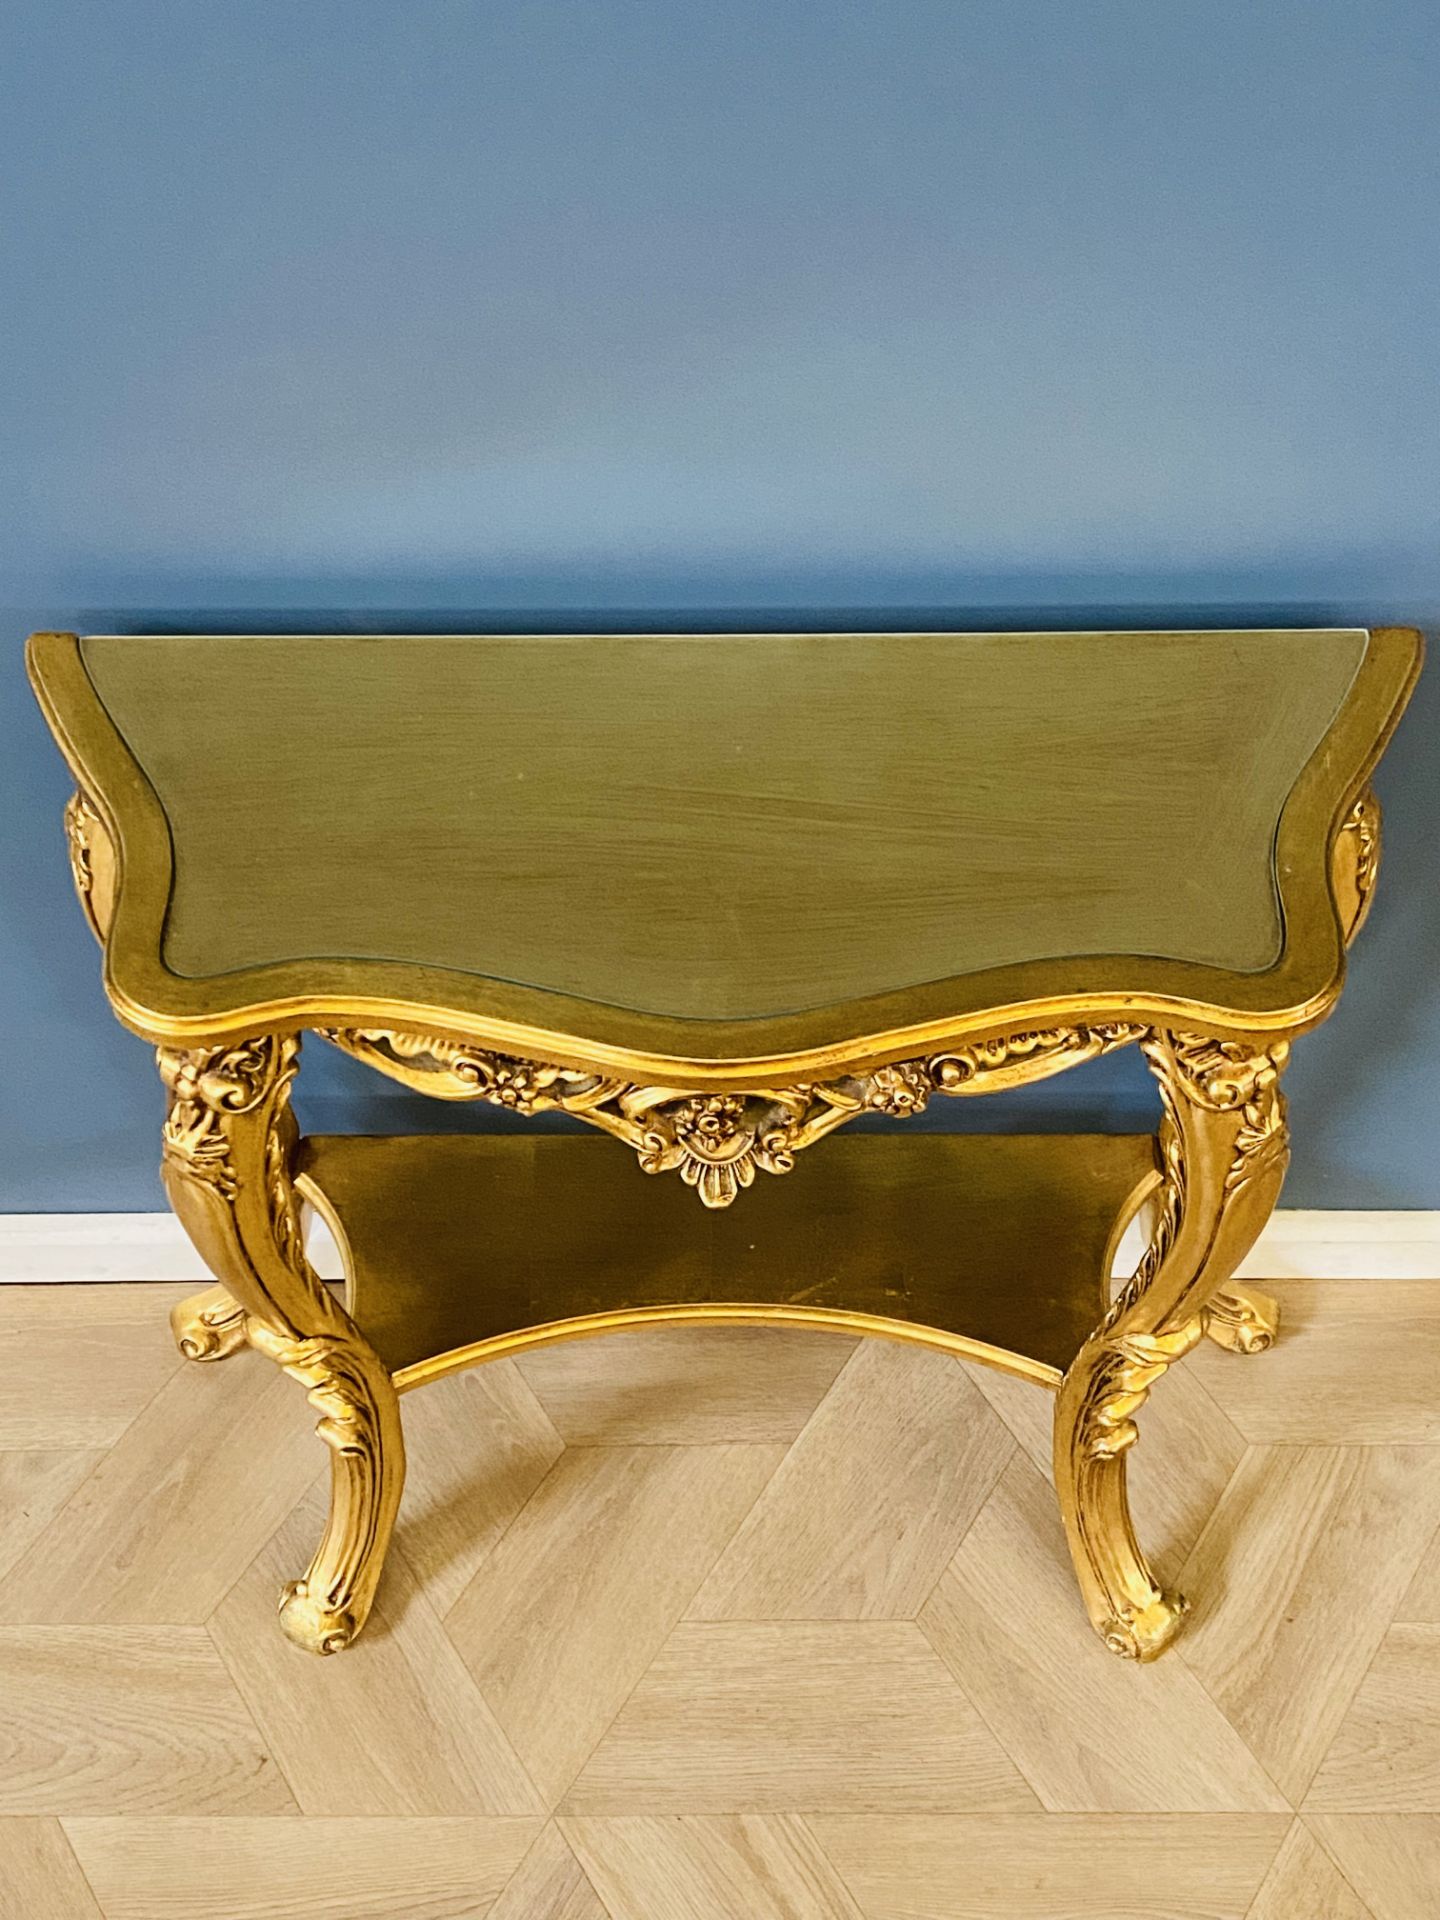 Serpentine carved giltwood console table - Image 5 of 7